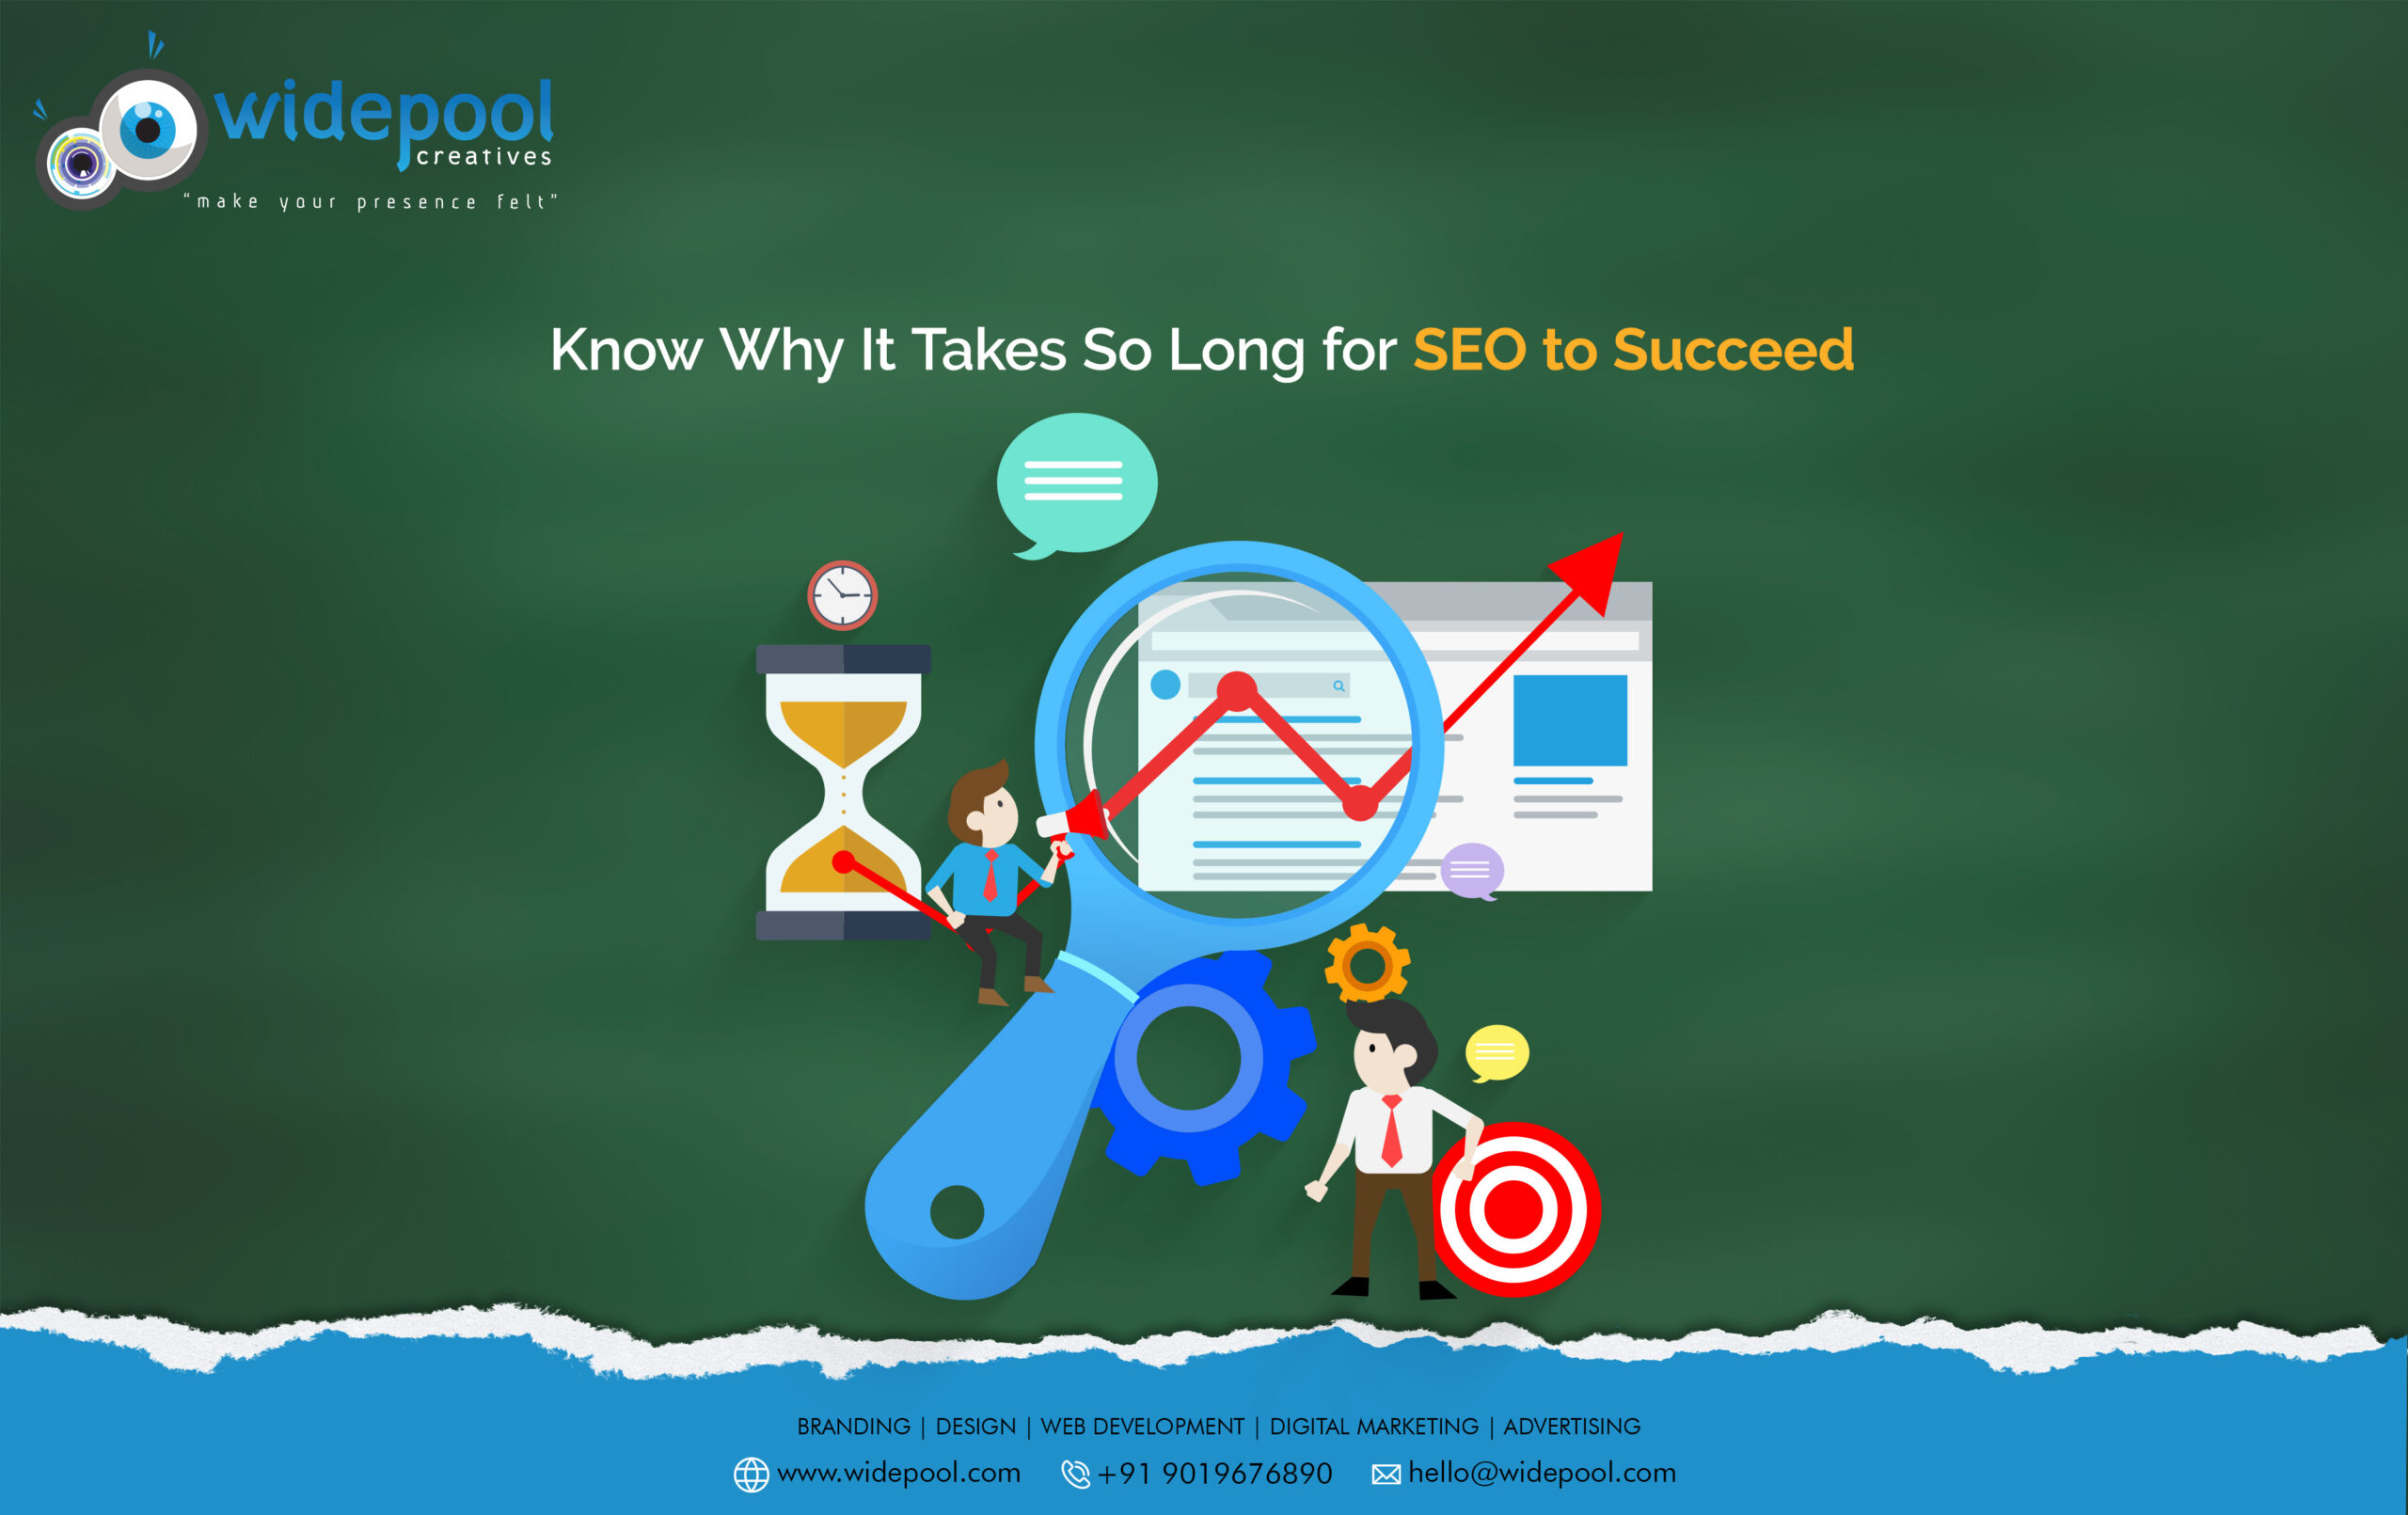 Know Why It Takes So Long for SEO to Succeed